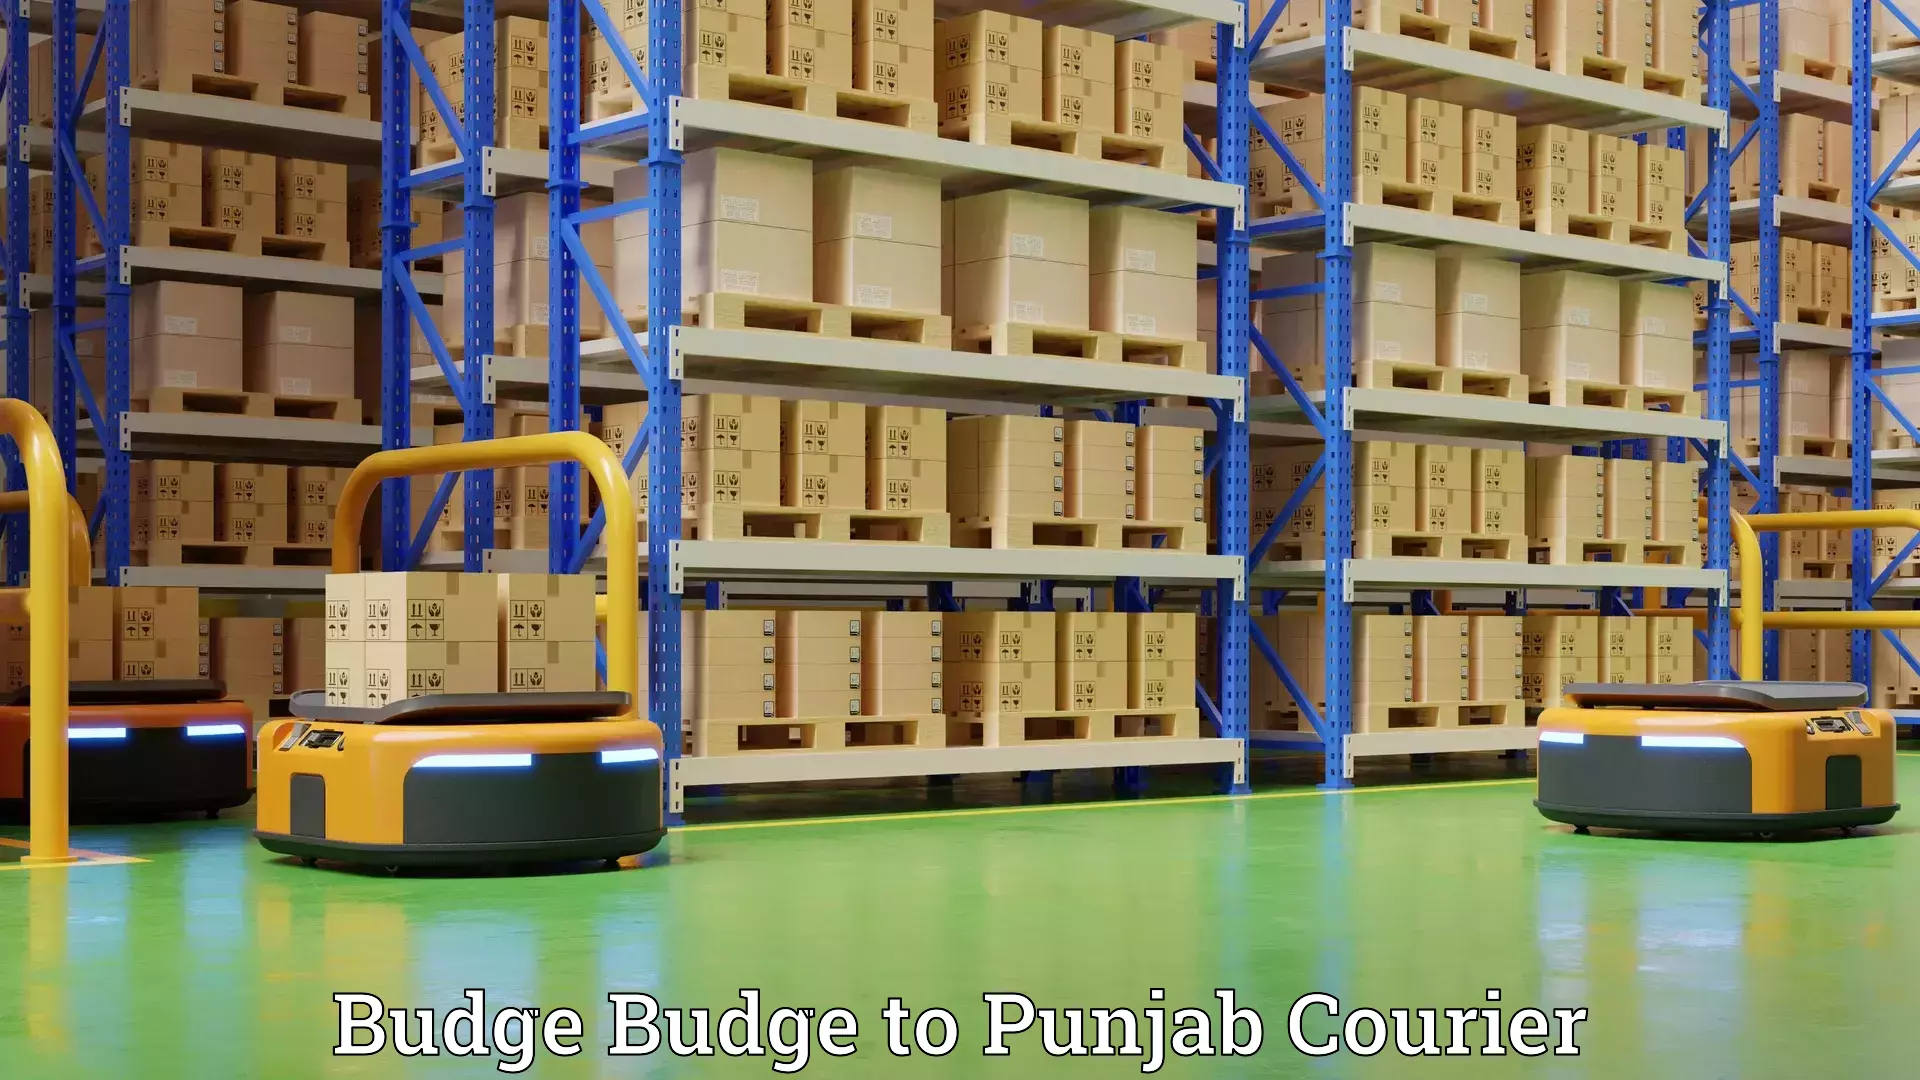 Home relocation experts Budge Budge to Punjab